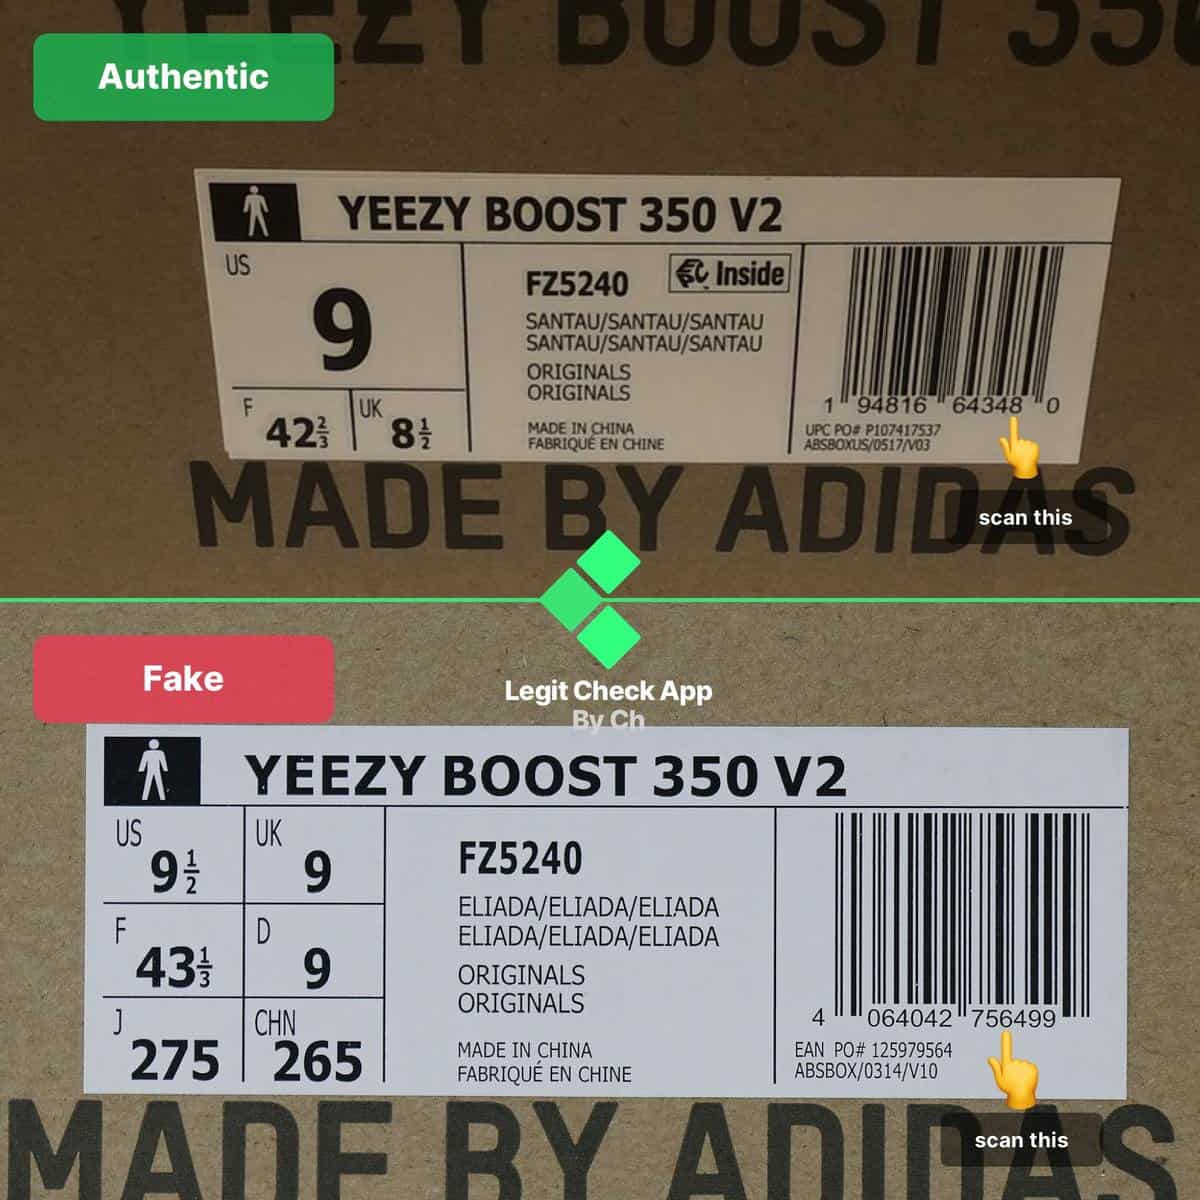 Yeezy Boost 350 V2 Sand Taupe Fake Vs Real Guide (Yeezy Eliada) - Legit ...